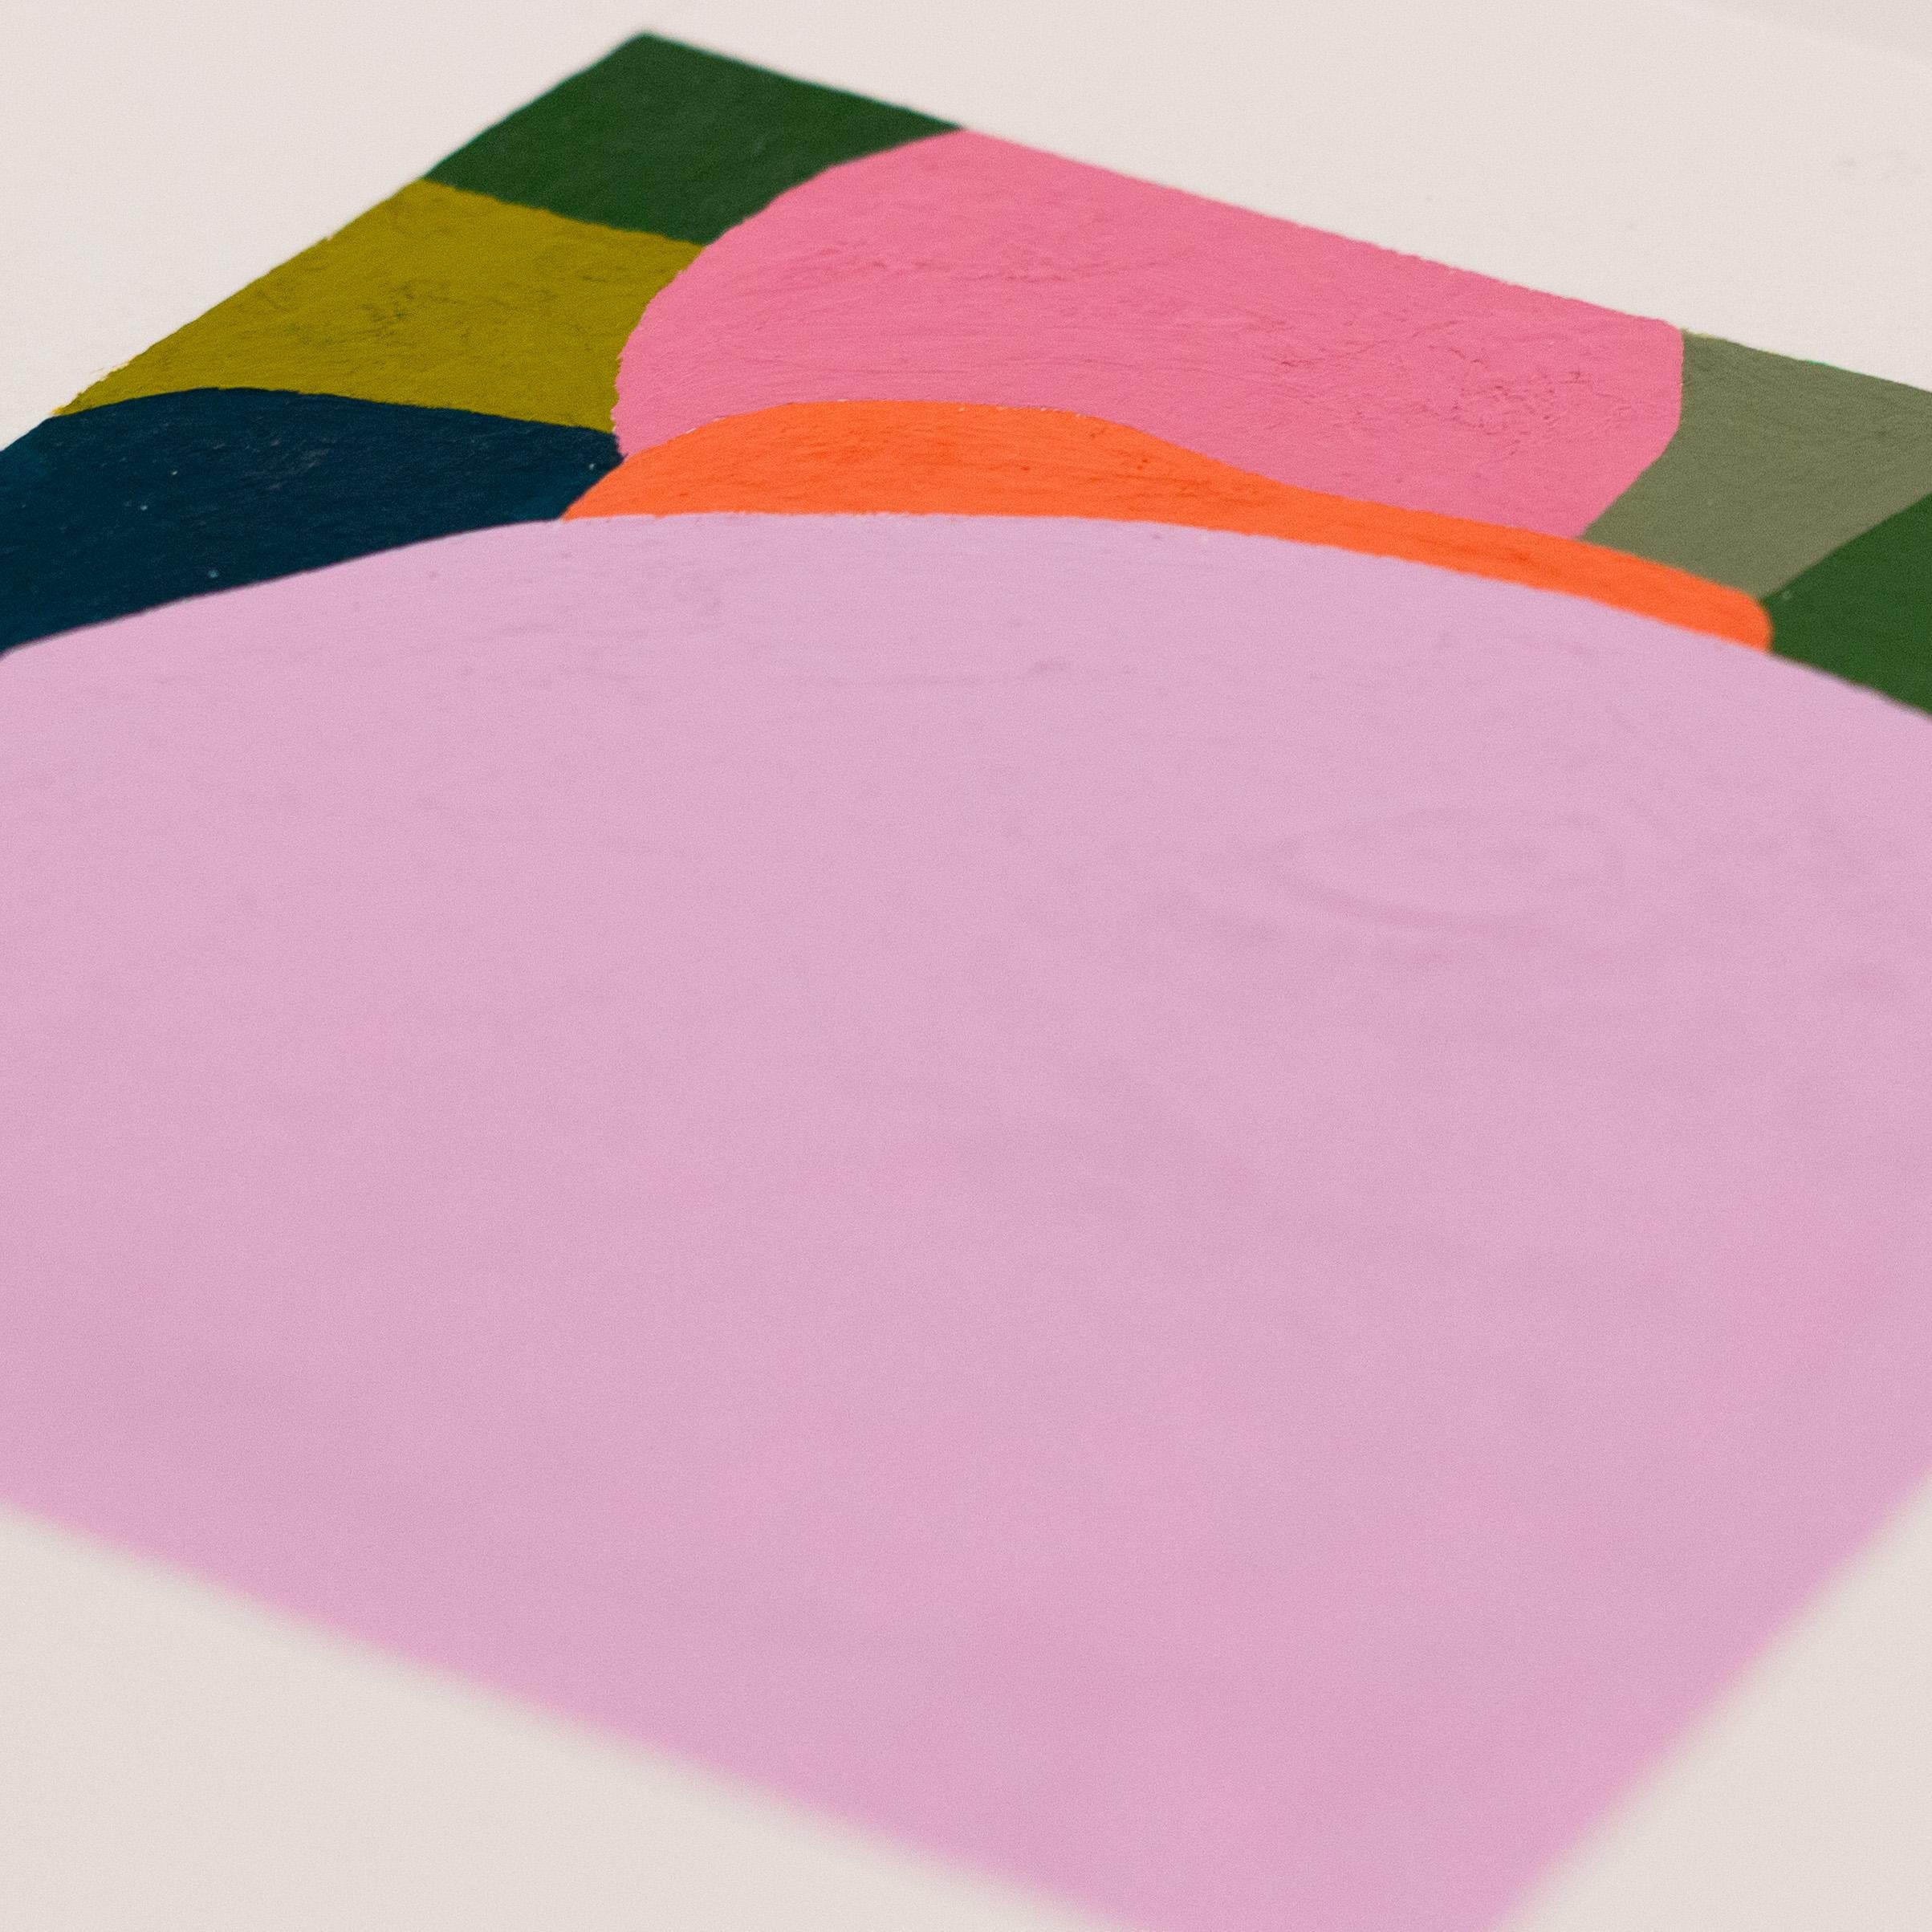 Barbara Marks is a multidisciplinary artist based in Connecticut. She uses color to create space.

